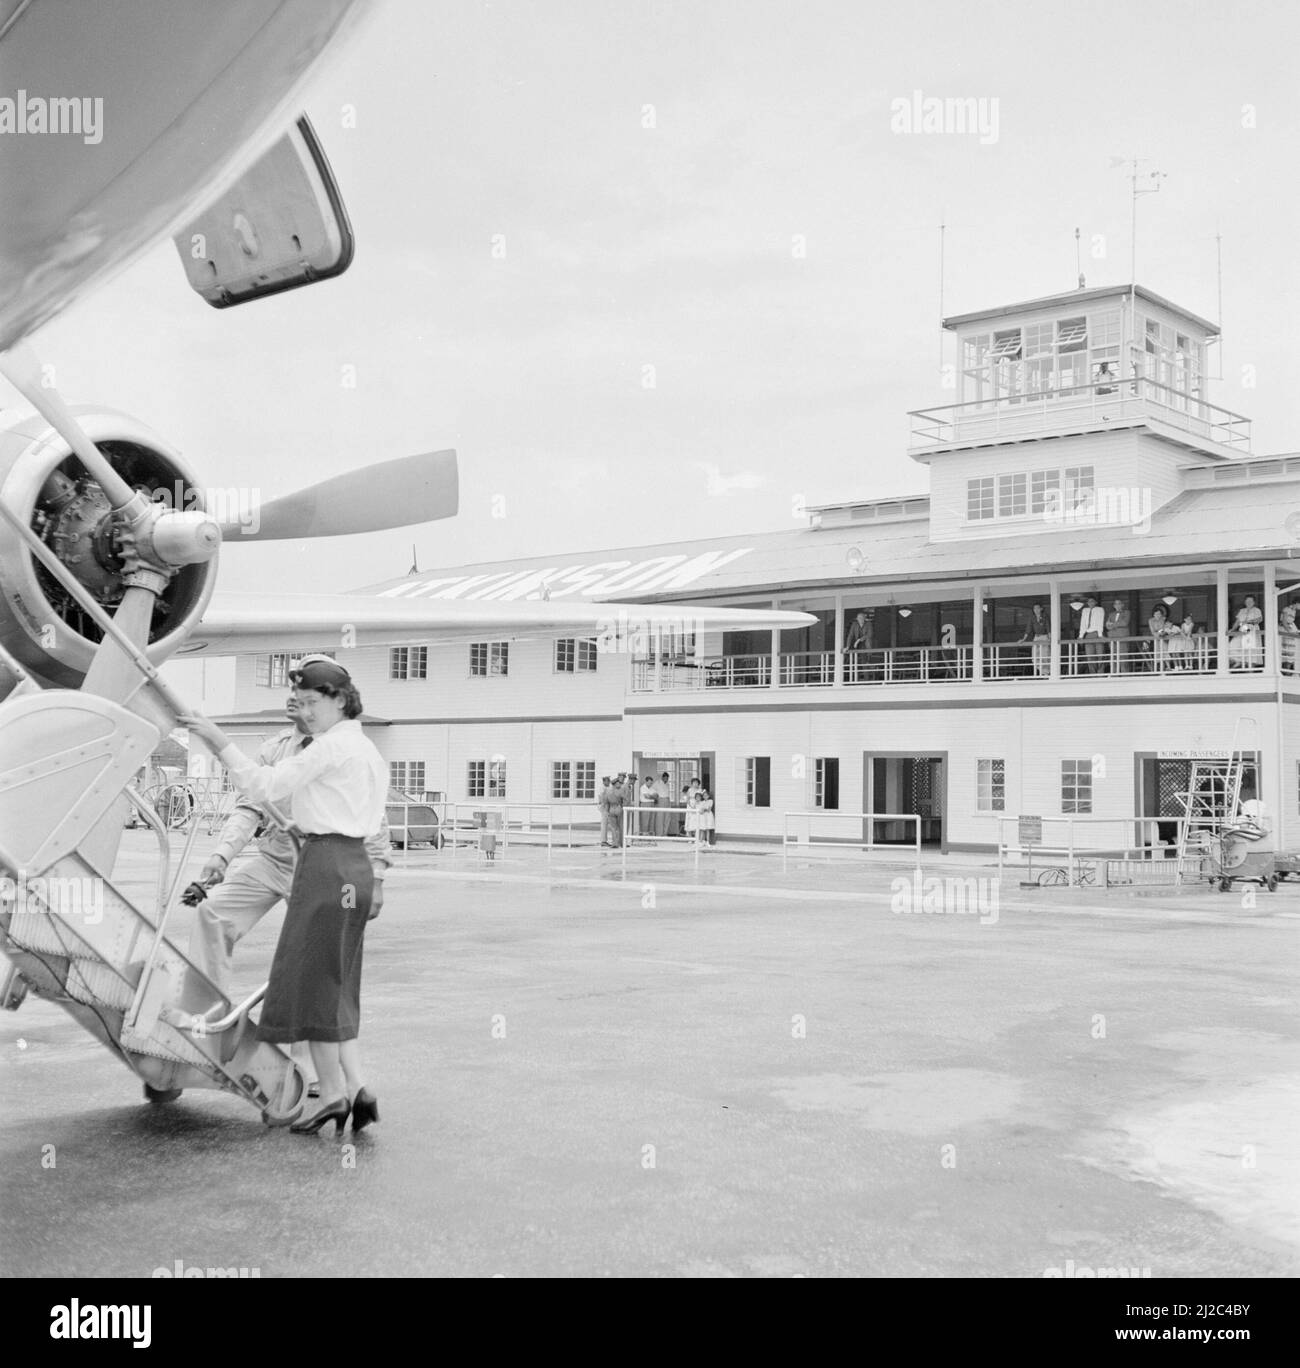 Airport Port of Spain in Trinidad ca. October 1, 1955 Stock Photo - Alamy